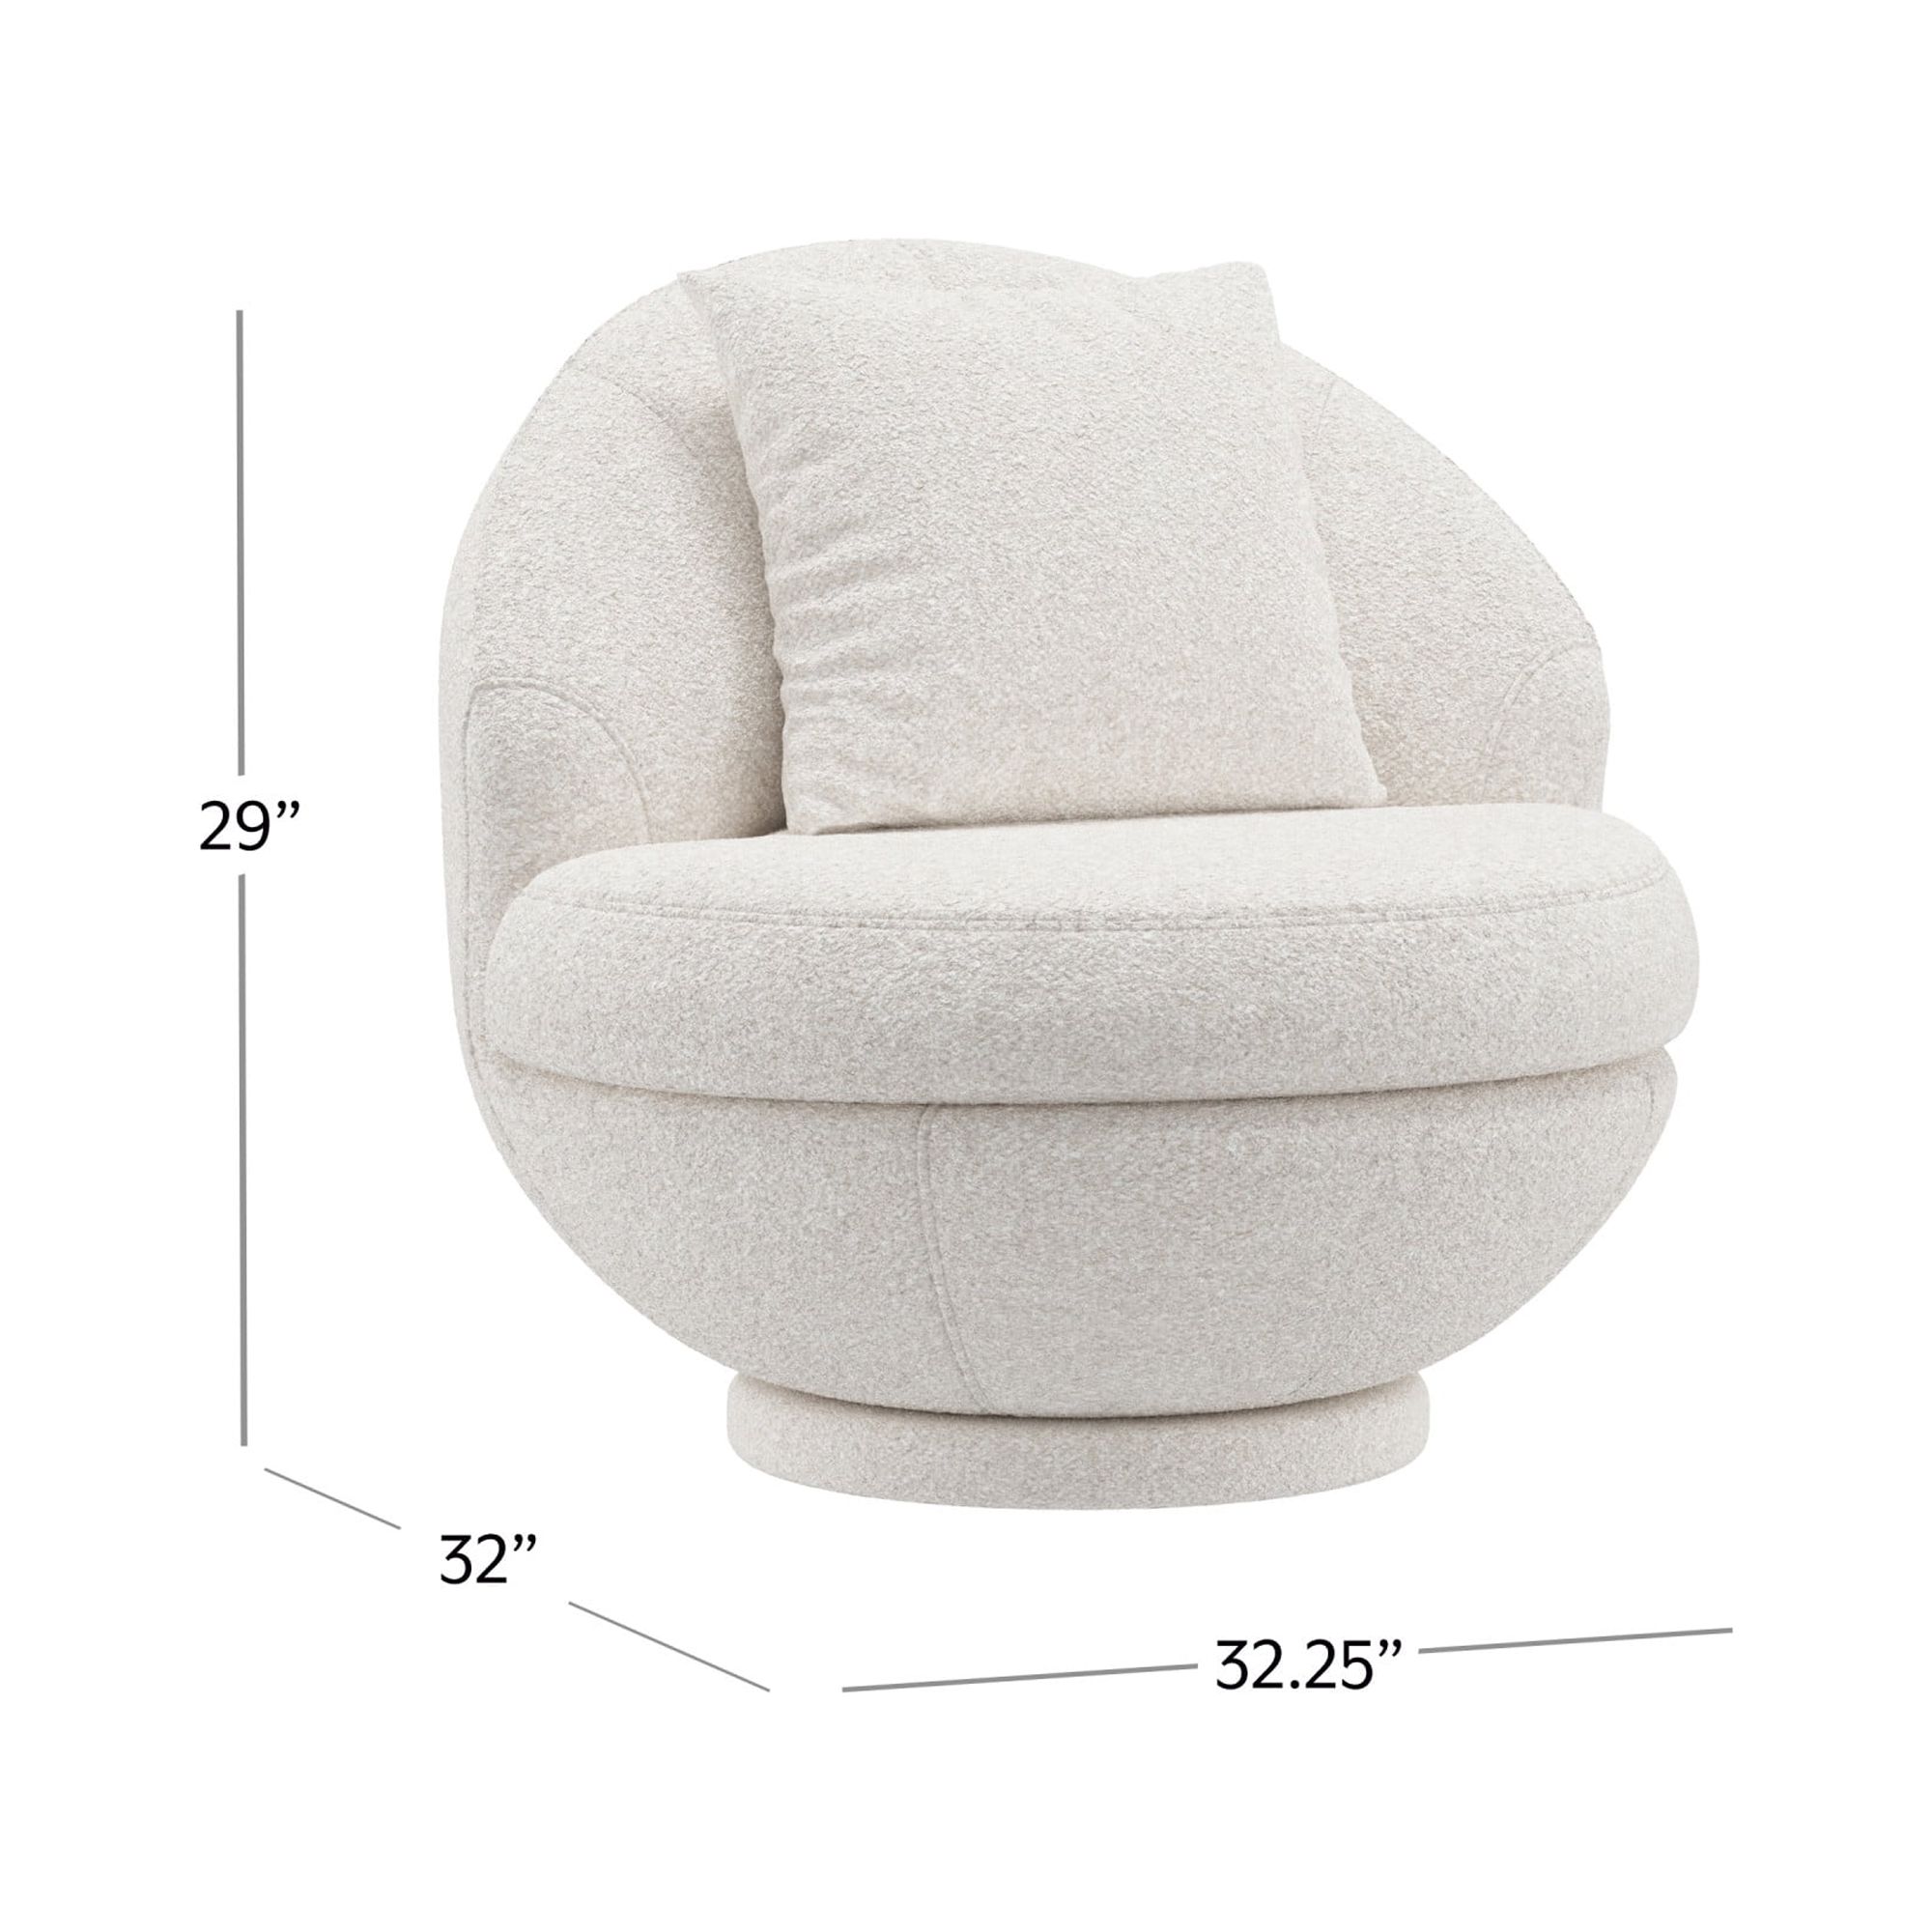 Hillsdale Boulder Upholstered Swivel Storage Chair, Ash White - image 4 of 22